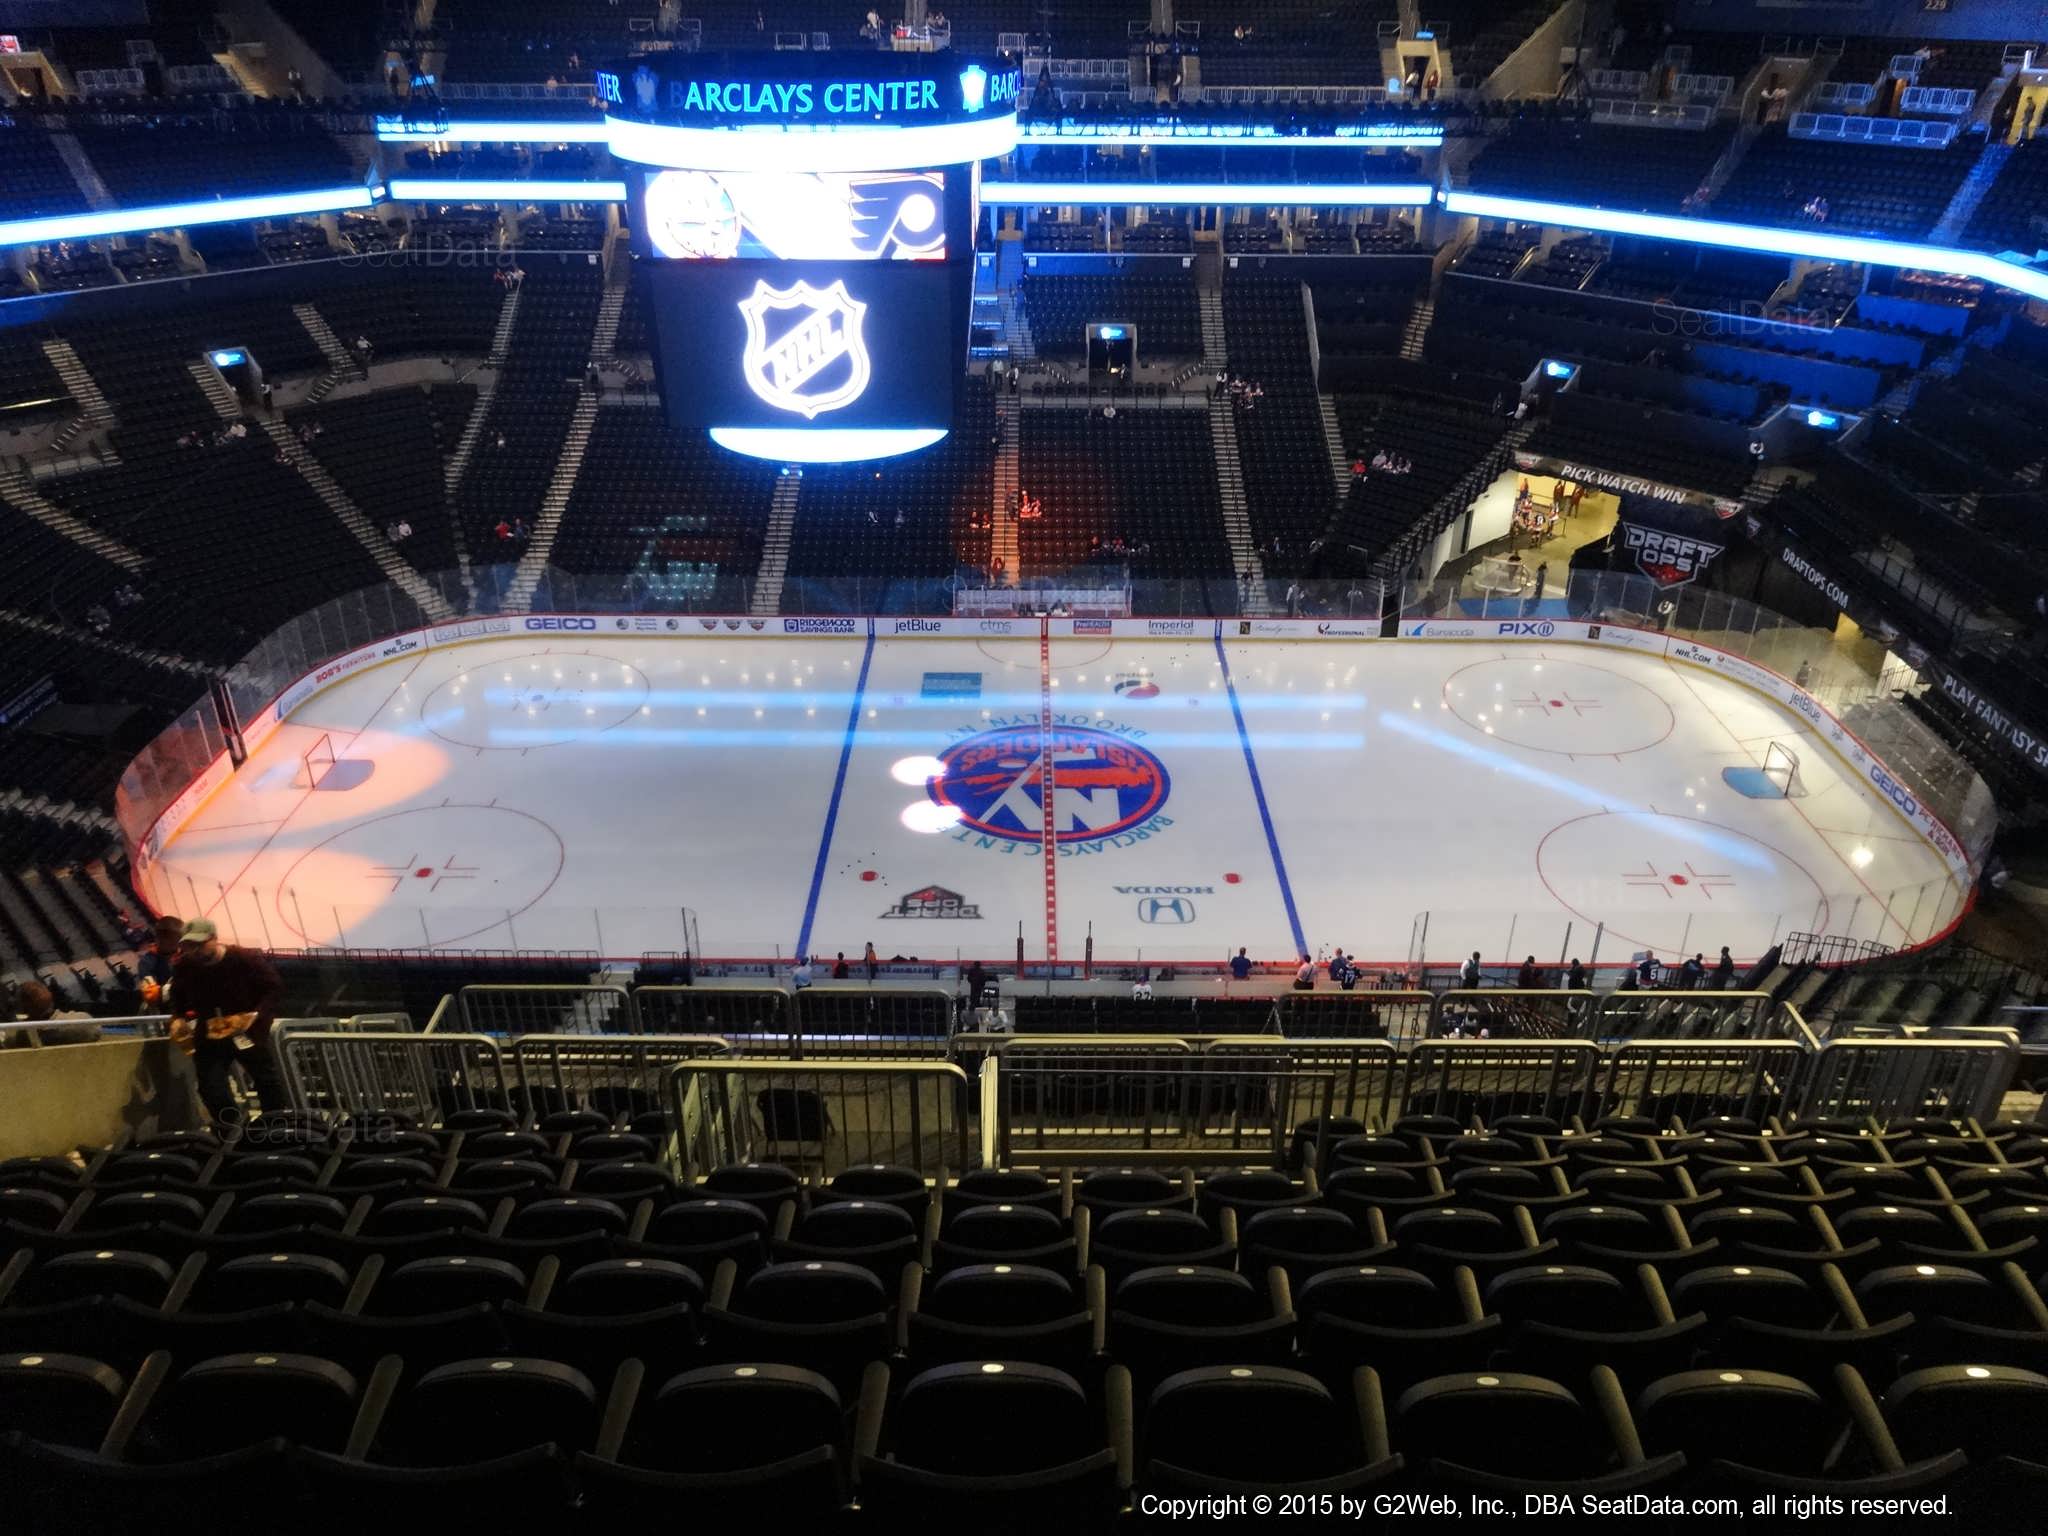 Seat View from Section 207 at the Barclays Center, home of the New York Islanders